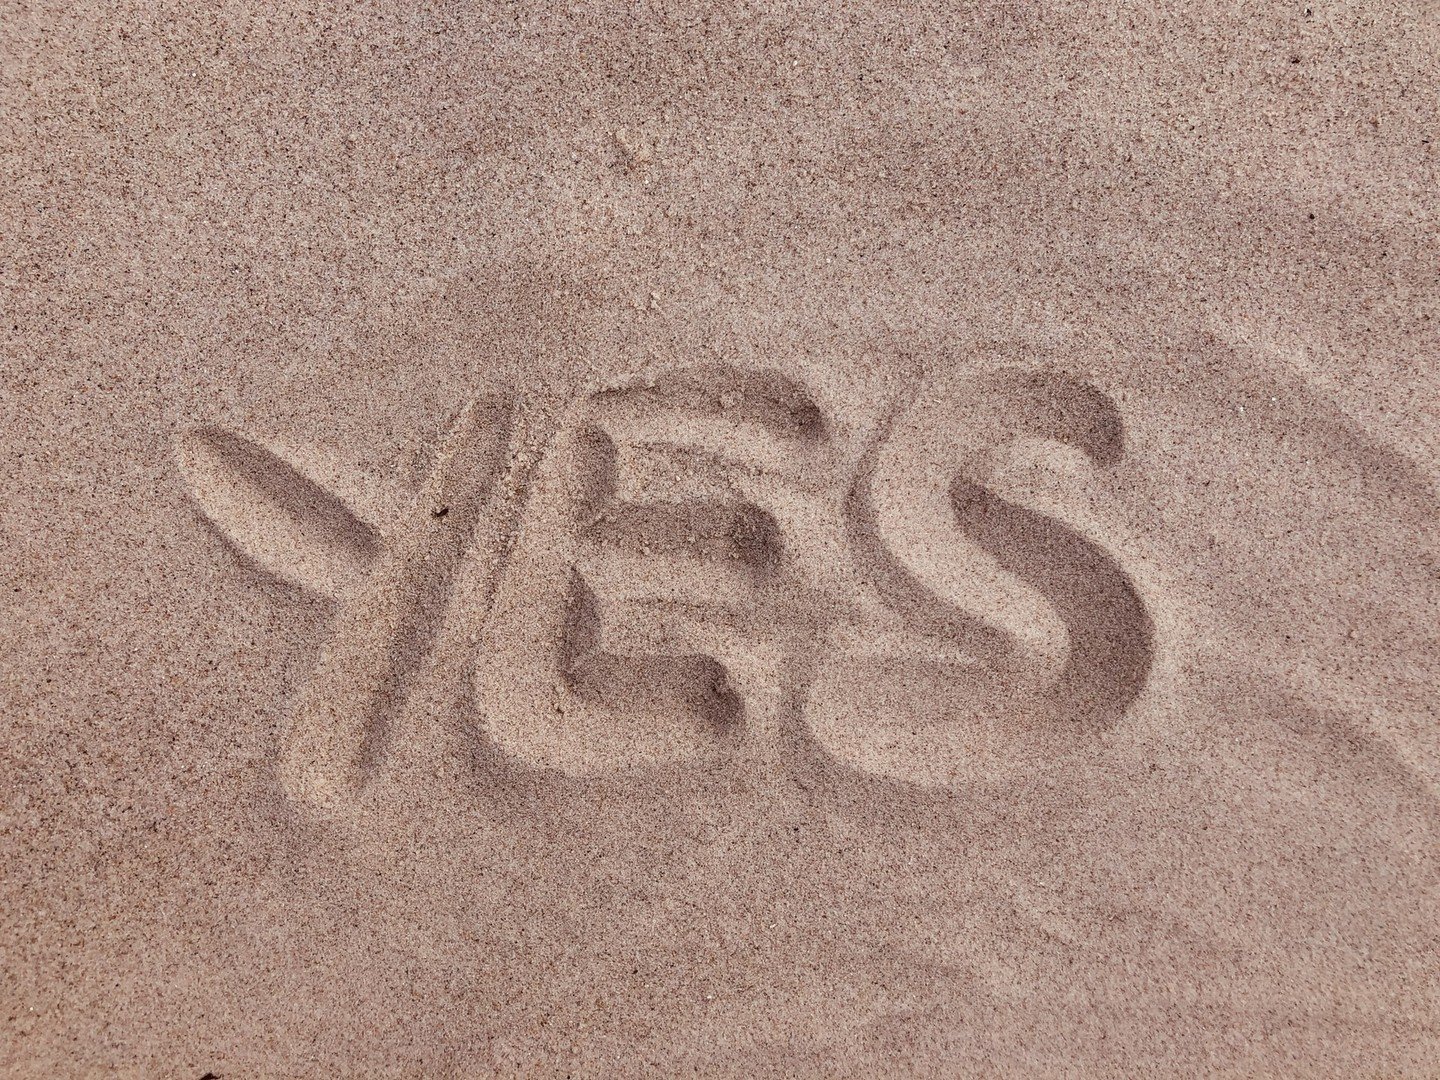 YES written in the sand